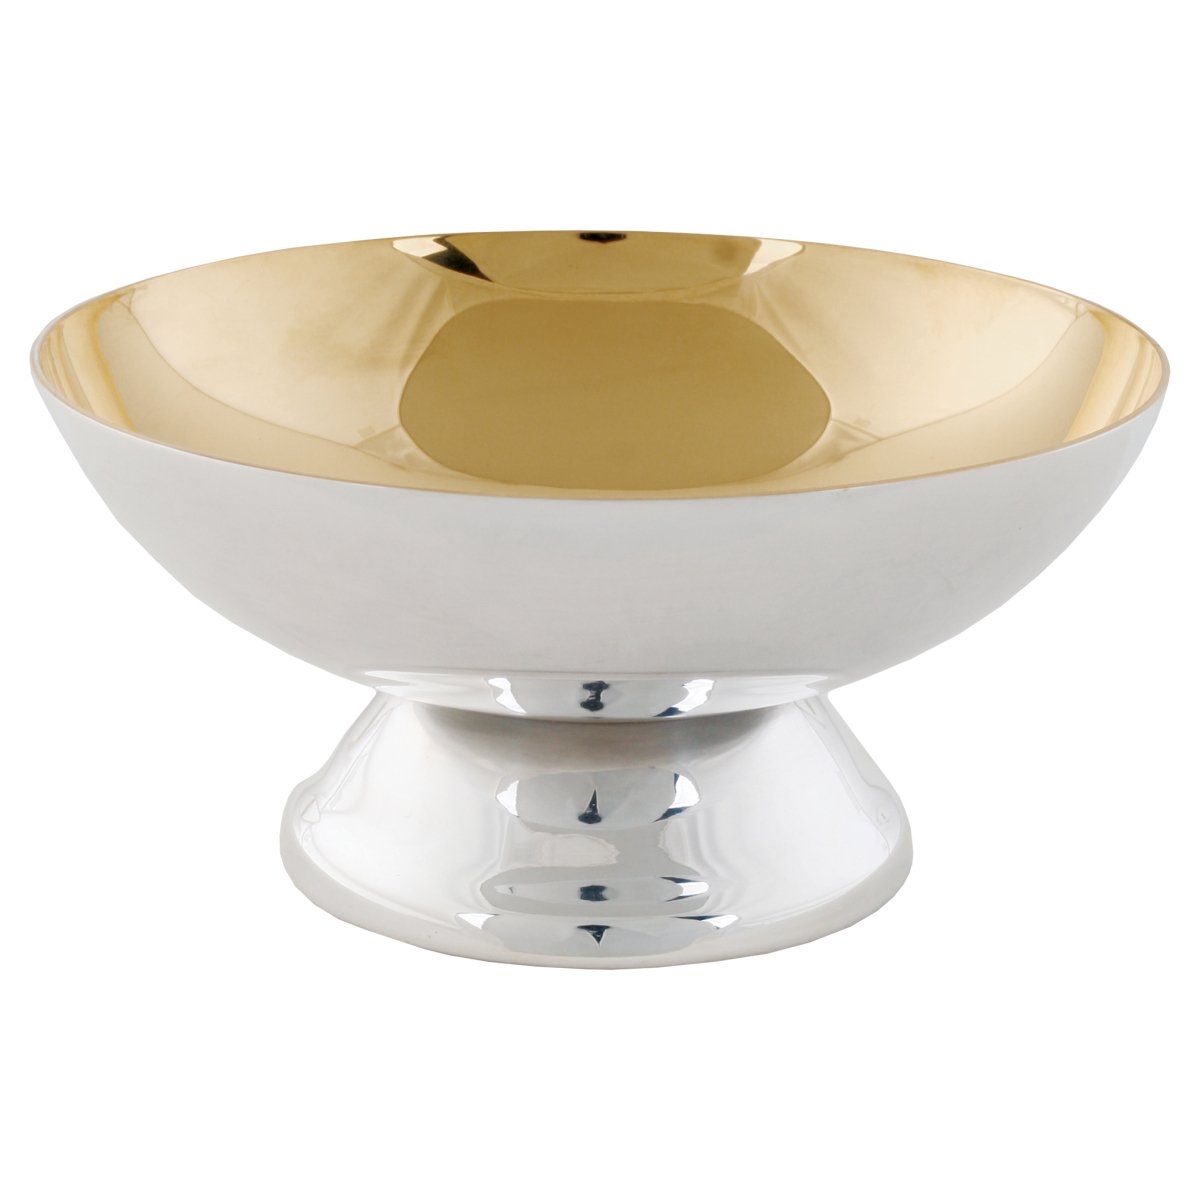 Consecration Paten - Hayes & Finch